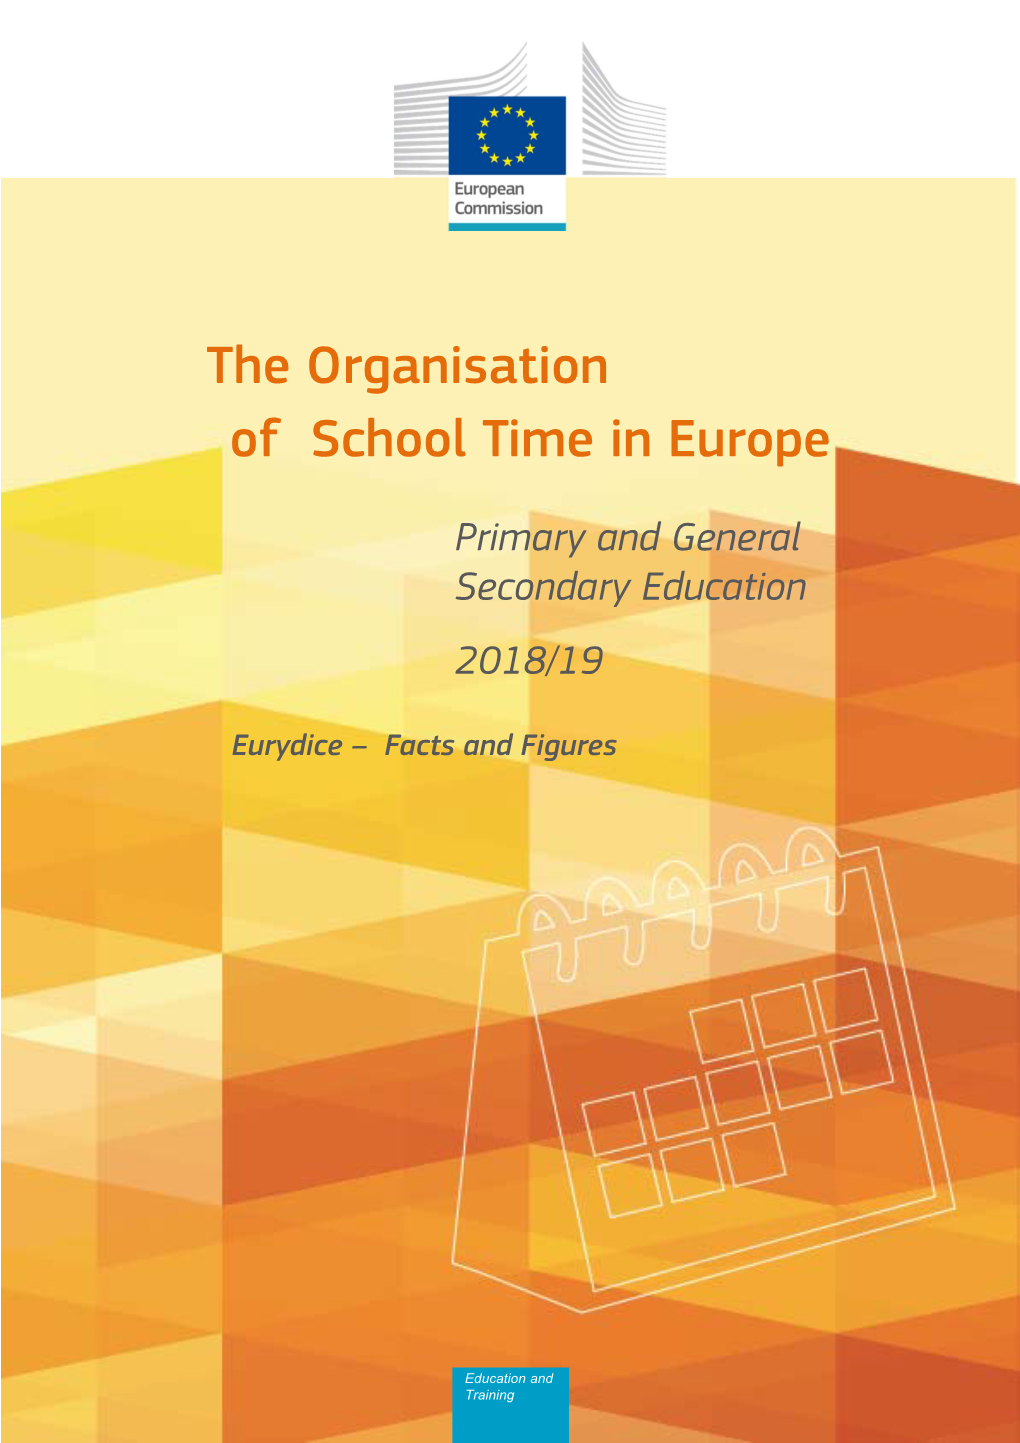 The Organisation of School Time in Europe